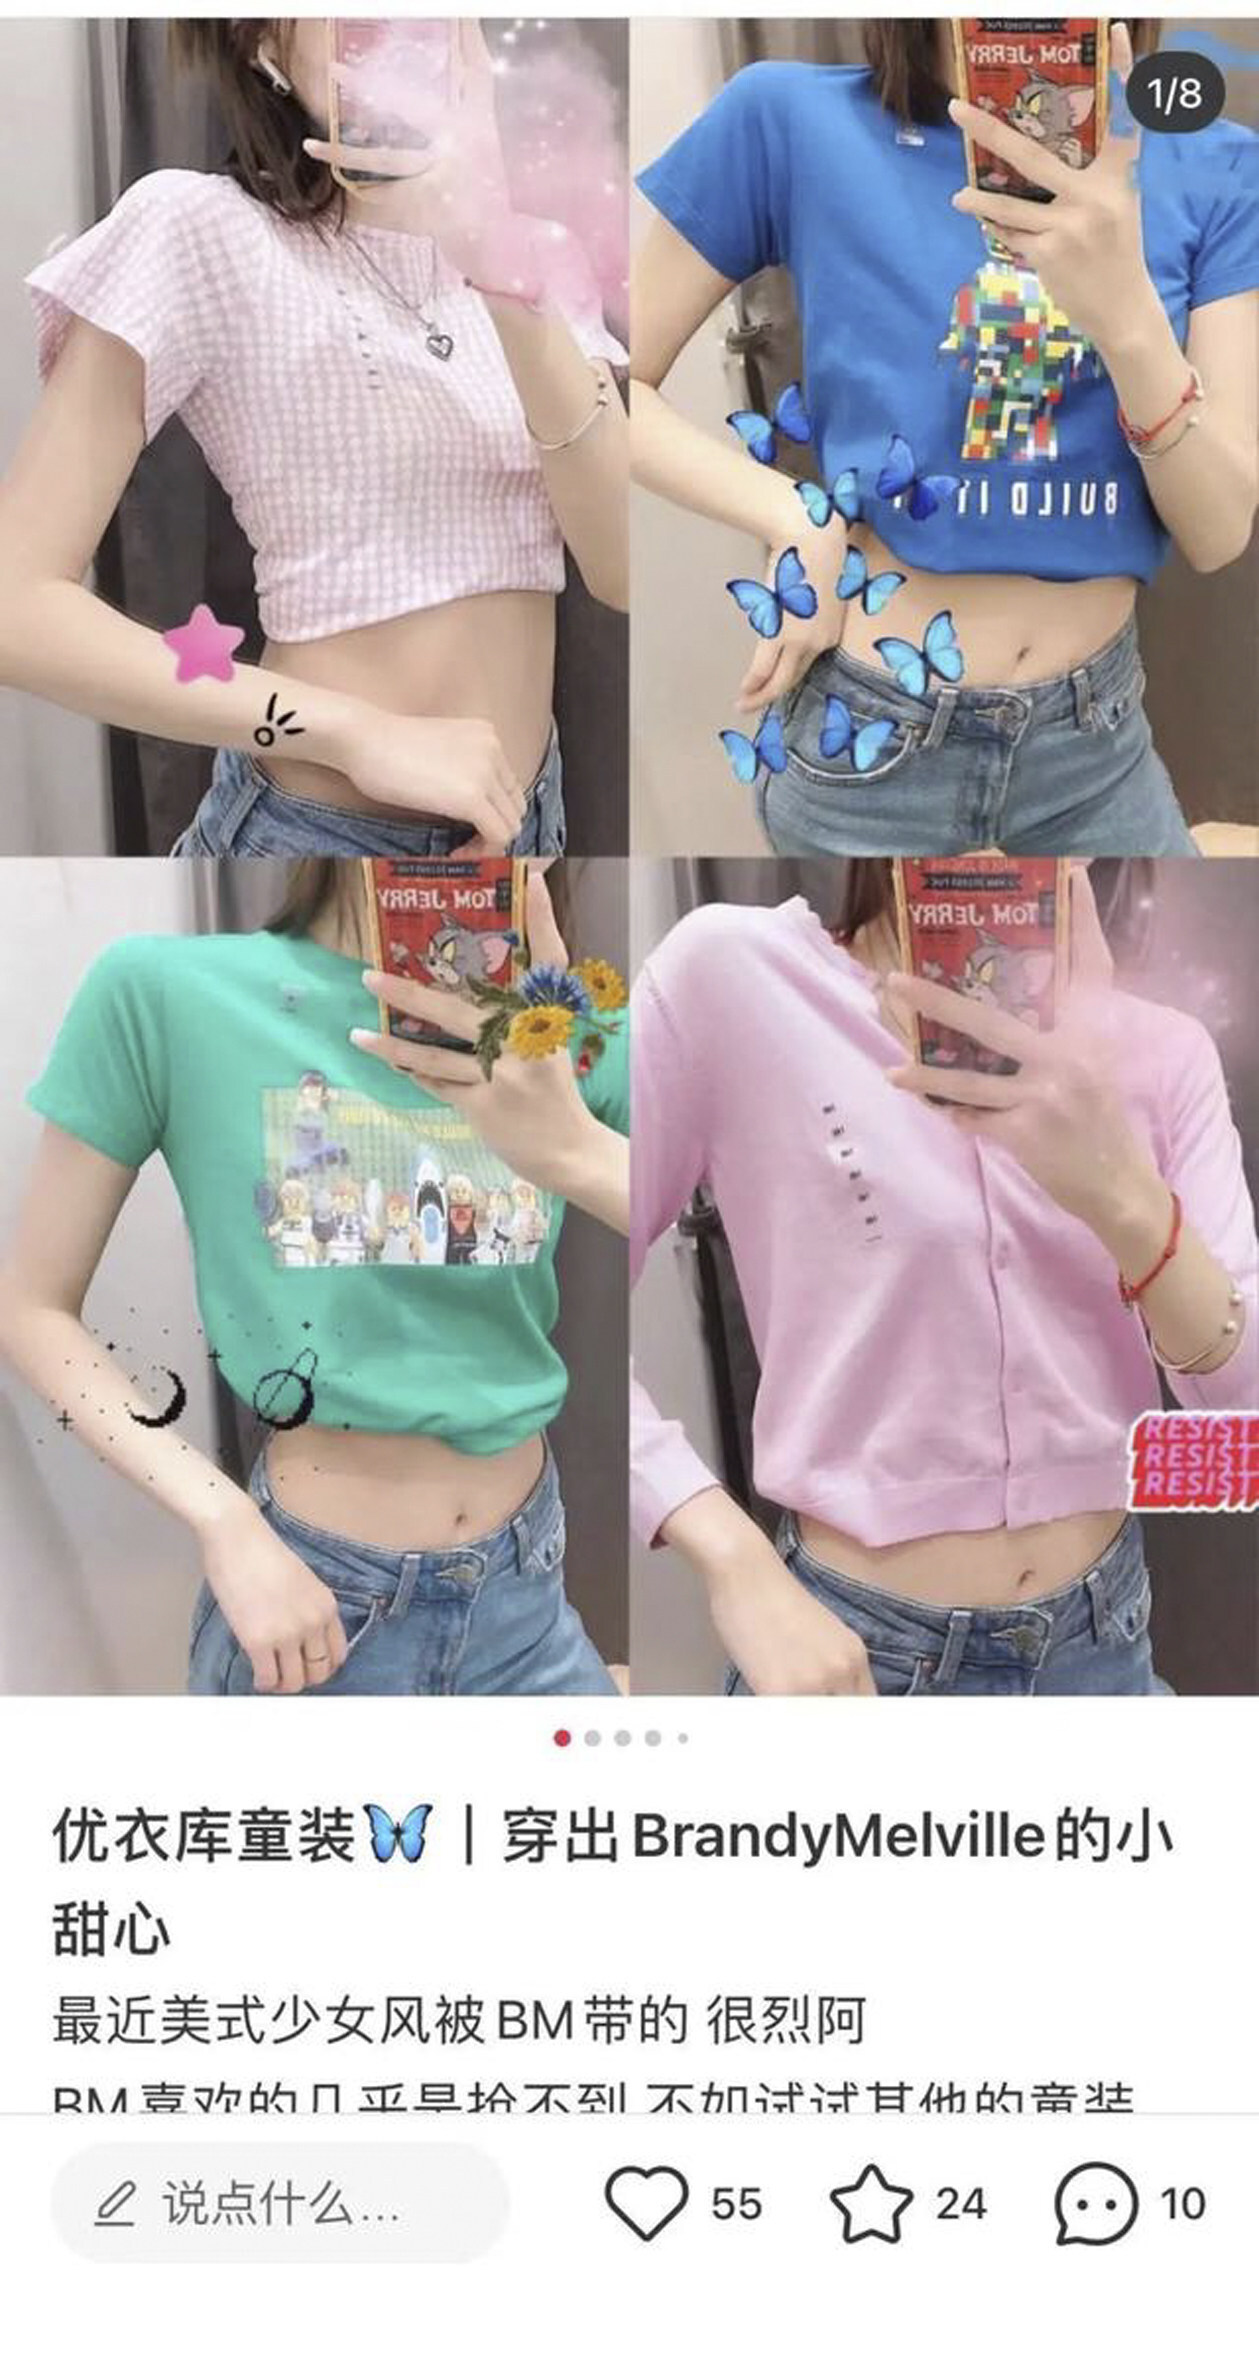 Parents are horrified that they may have bought children’s clothes tried on by adults and teenagers multiple times. Photo: Baidu